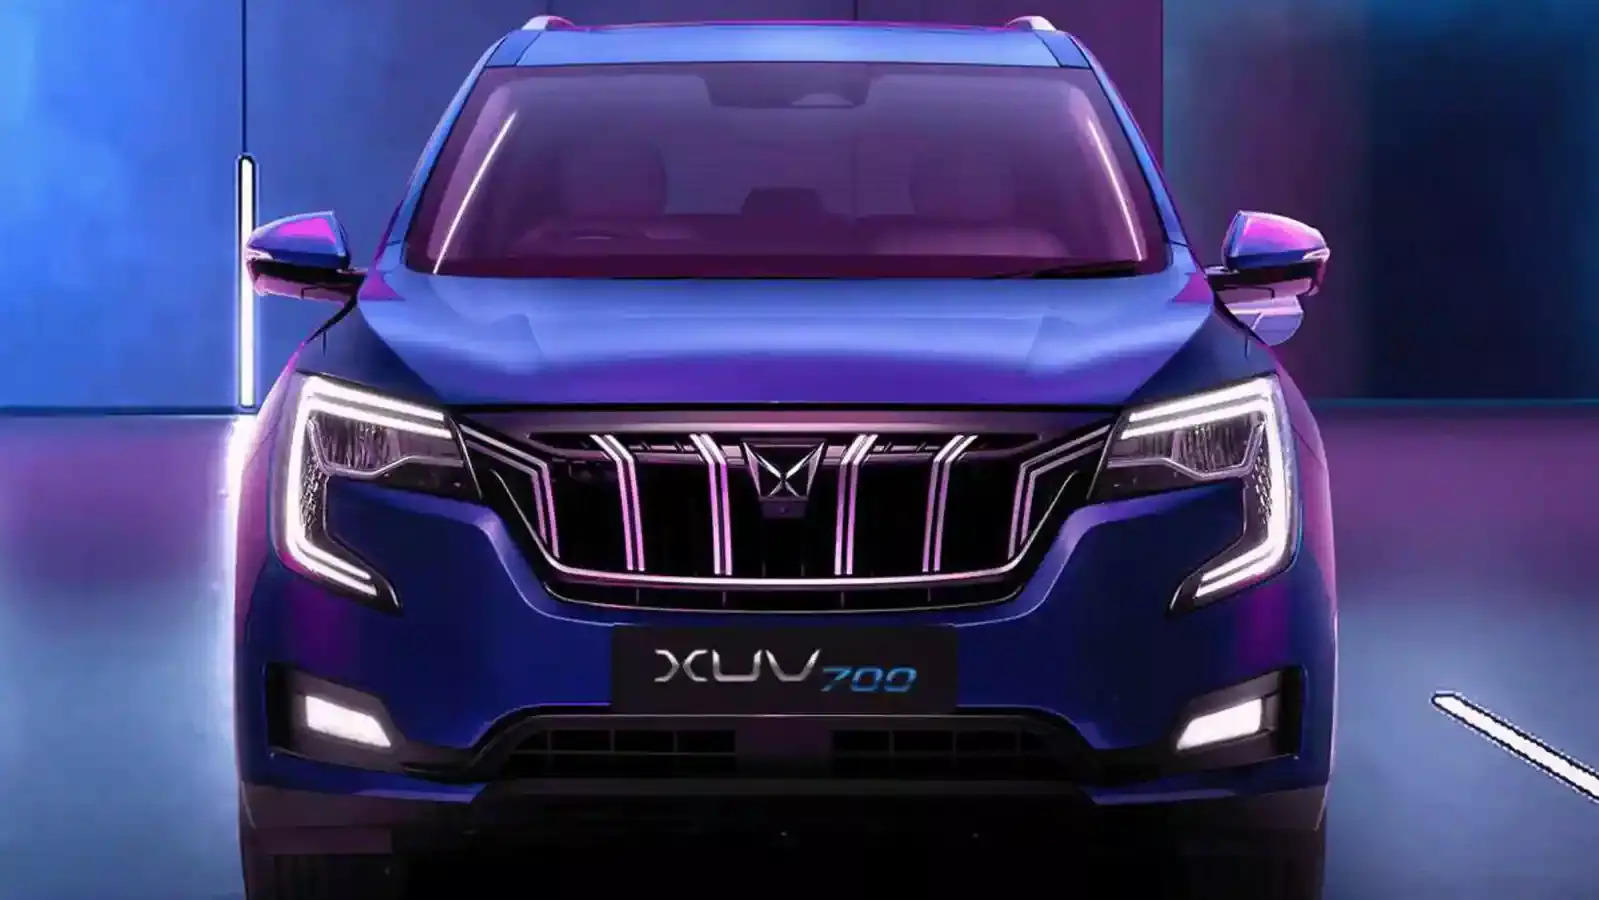  The company said that its automotive business has over 170,000 overall open bookings and XUV7OO is leading the way with 78,000 open bookings.